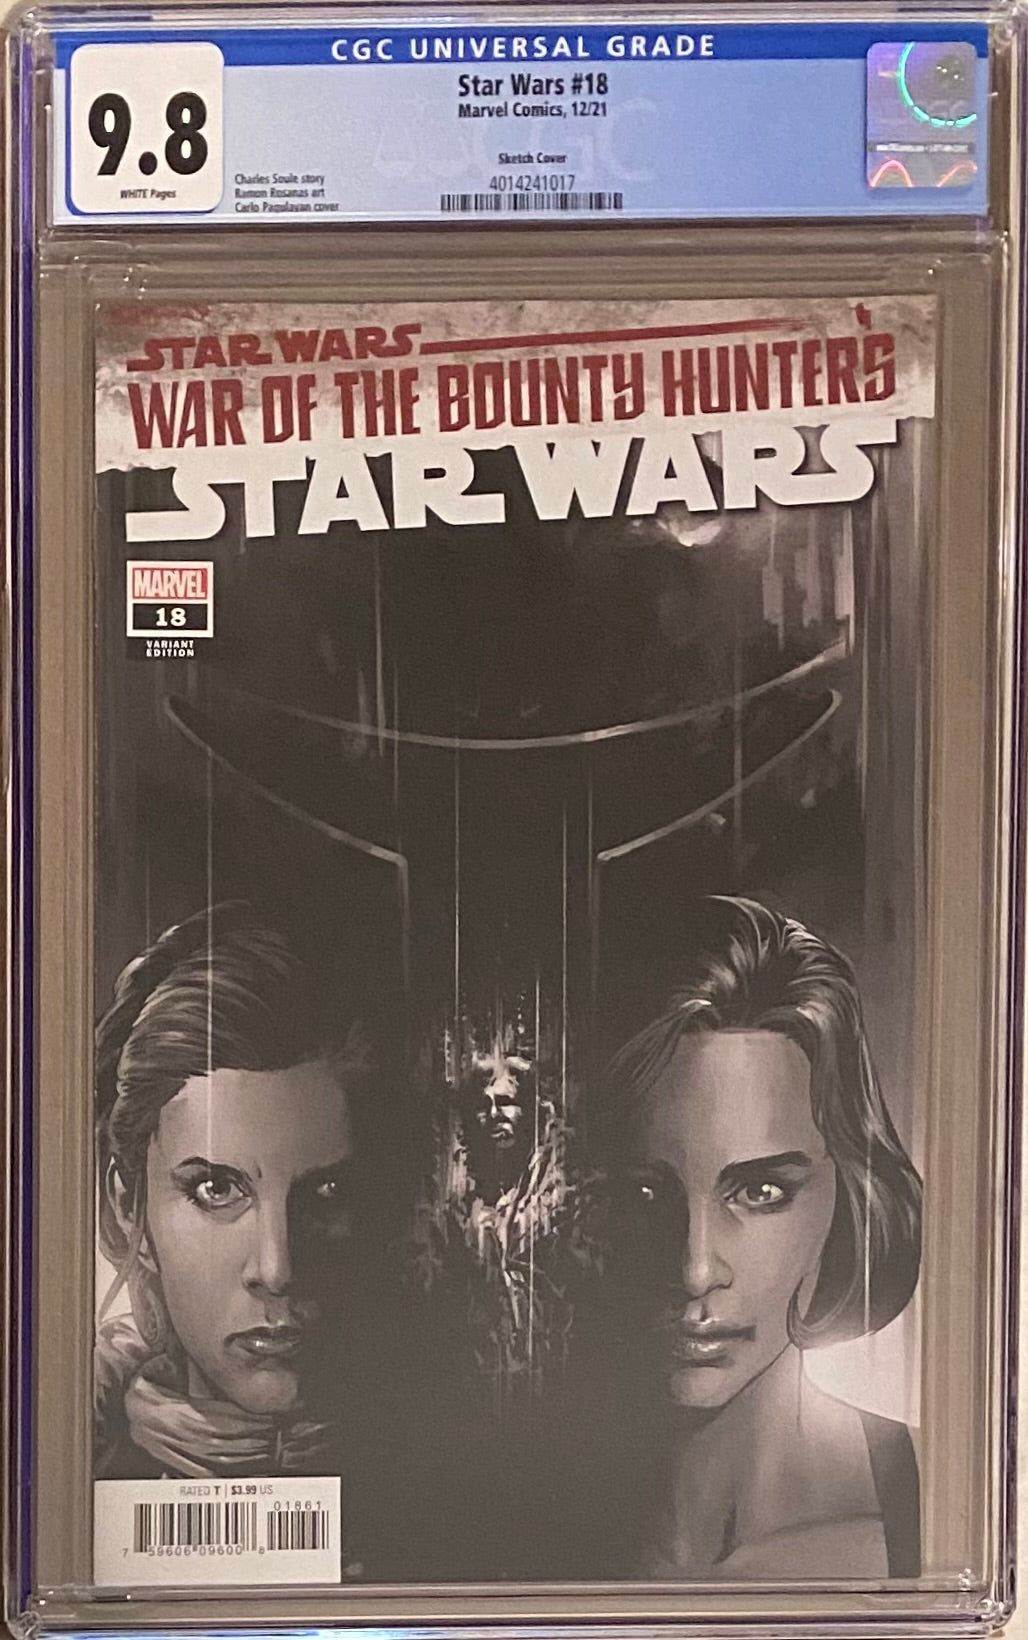 Star Wars #18 Carbonite Variant CGC 9.8 - War of the Bounty Hunters